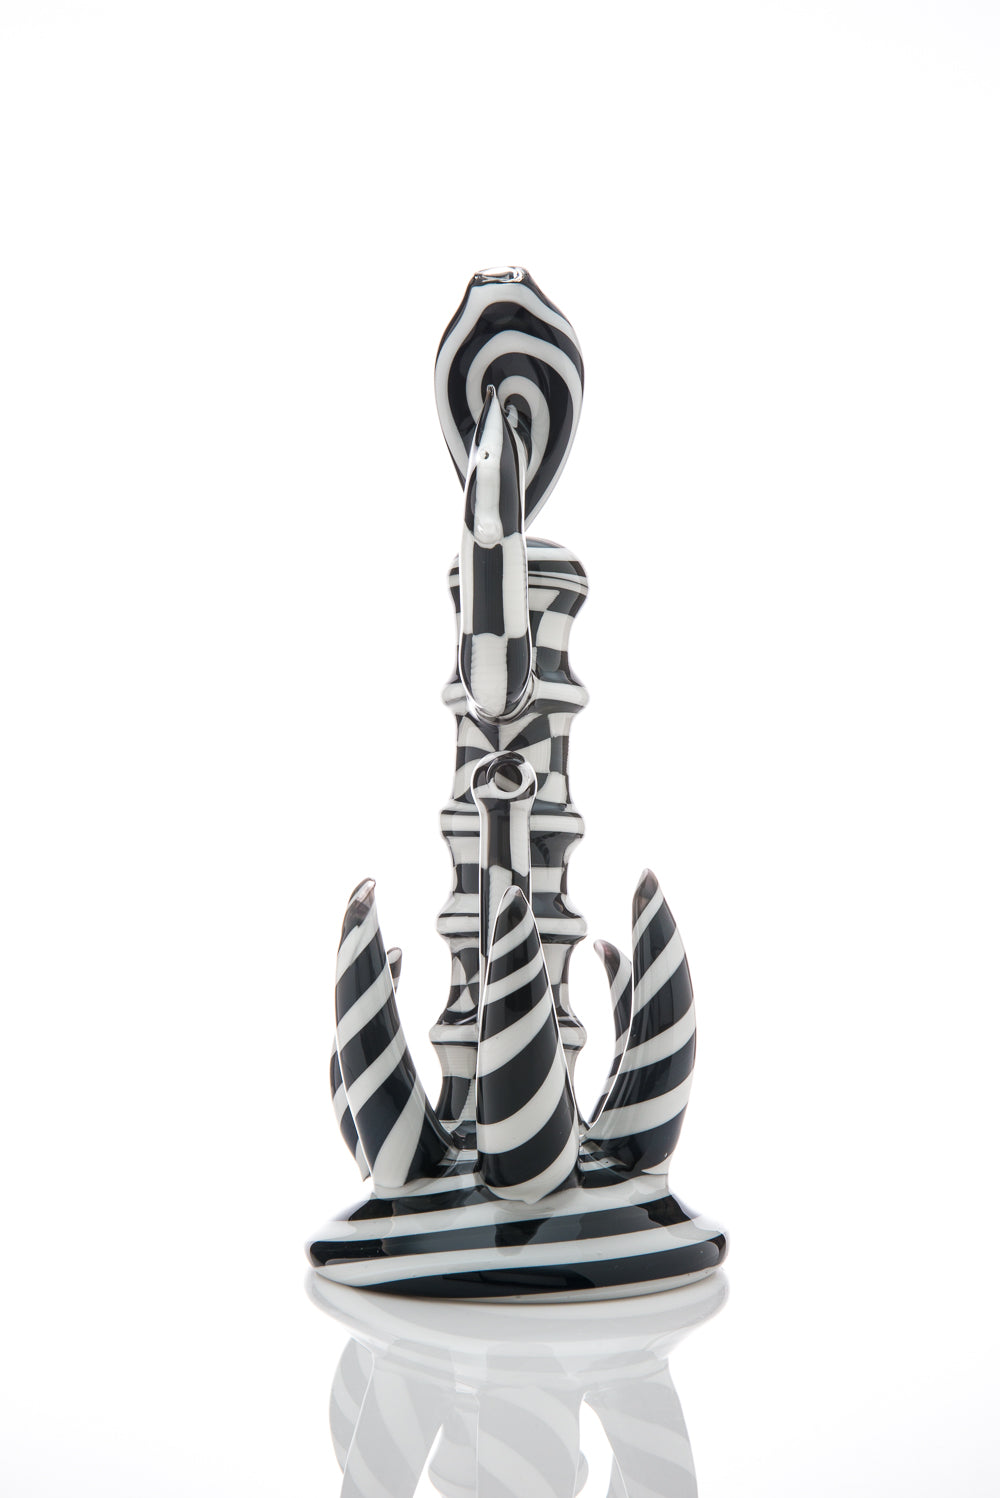 Black and White Checkered Bubbler by Chris Carlson